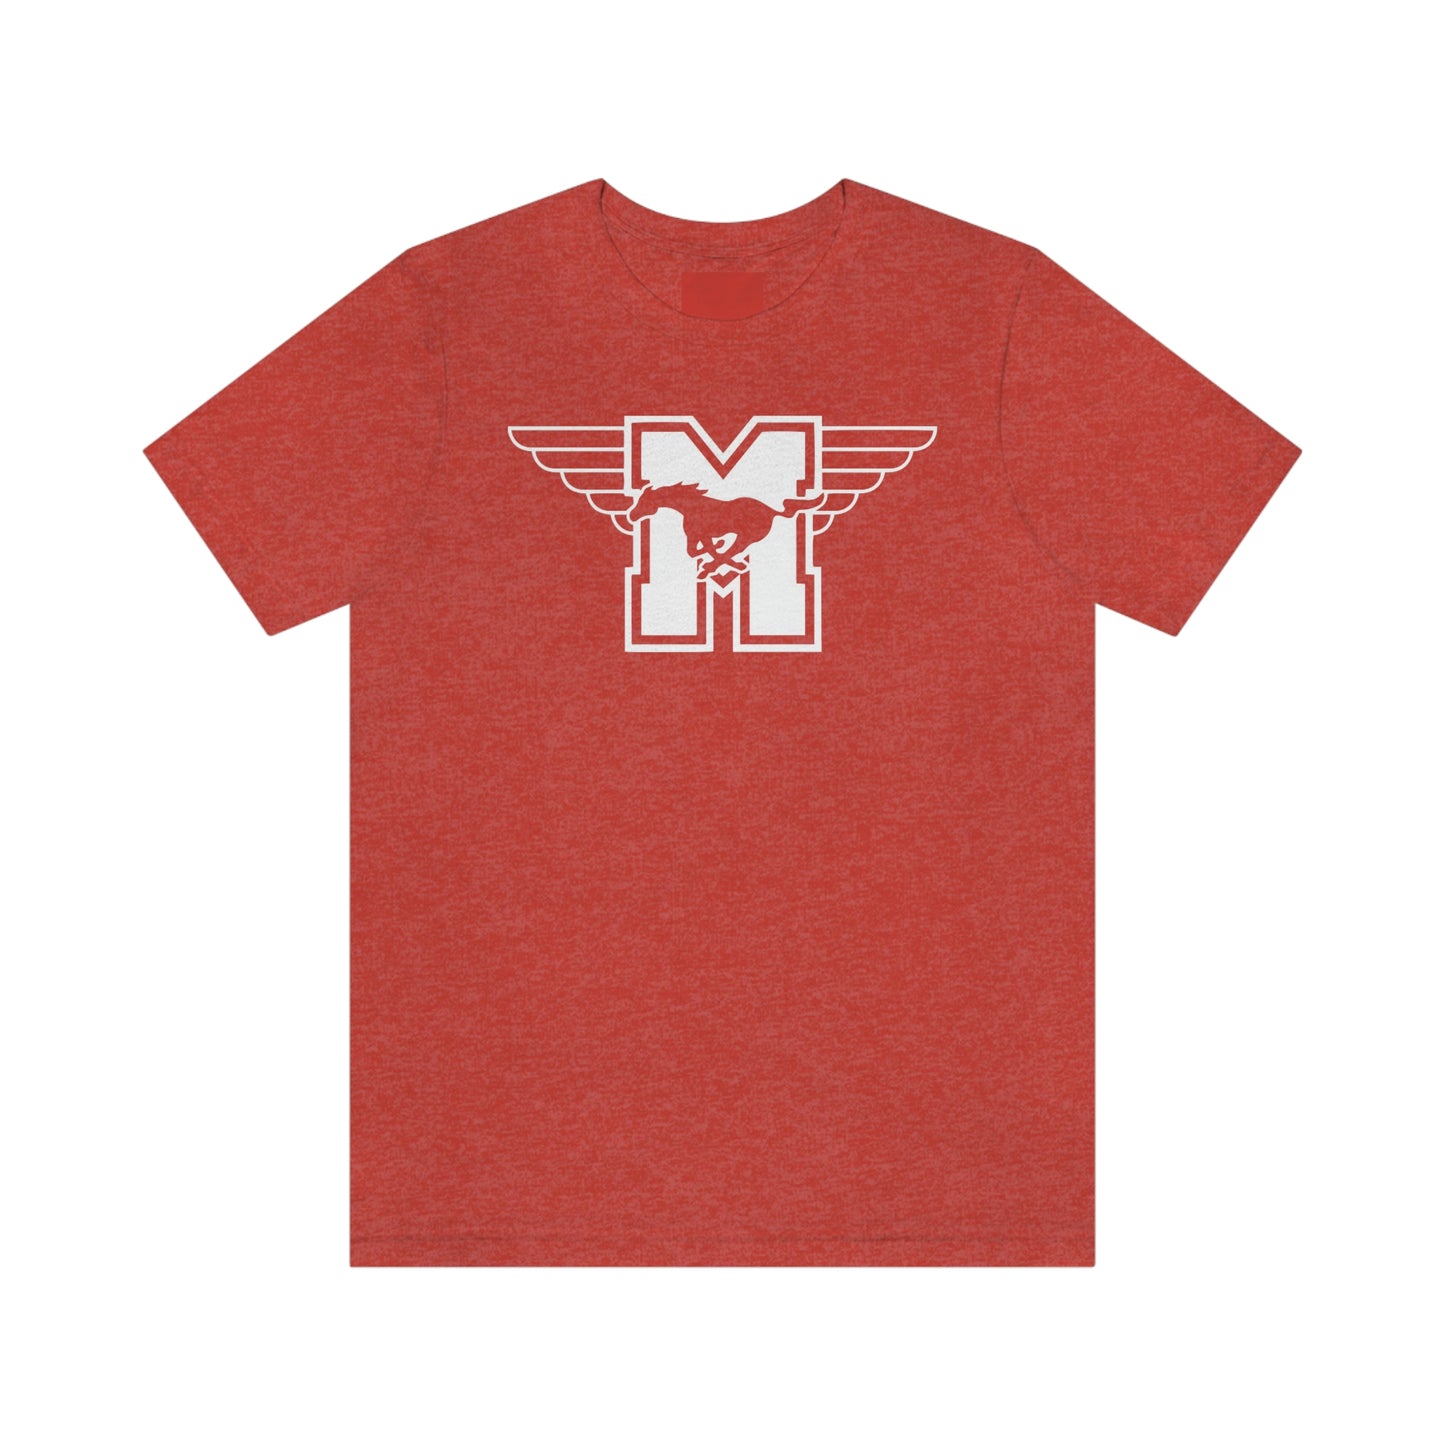 Youngblood - Hamilton Mustangs Tee